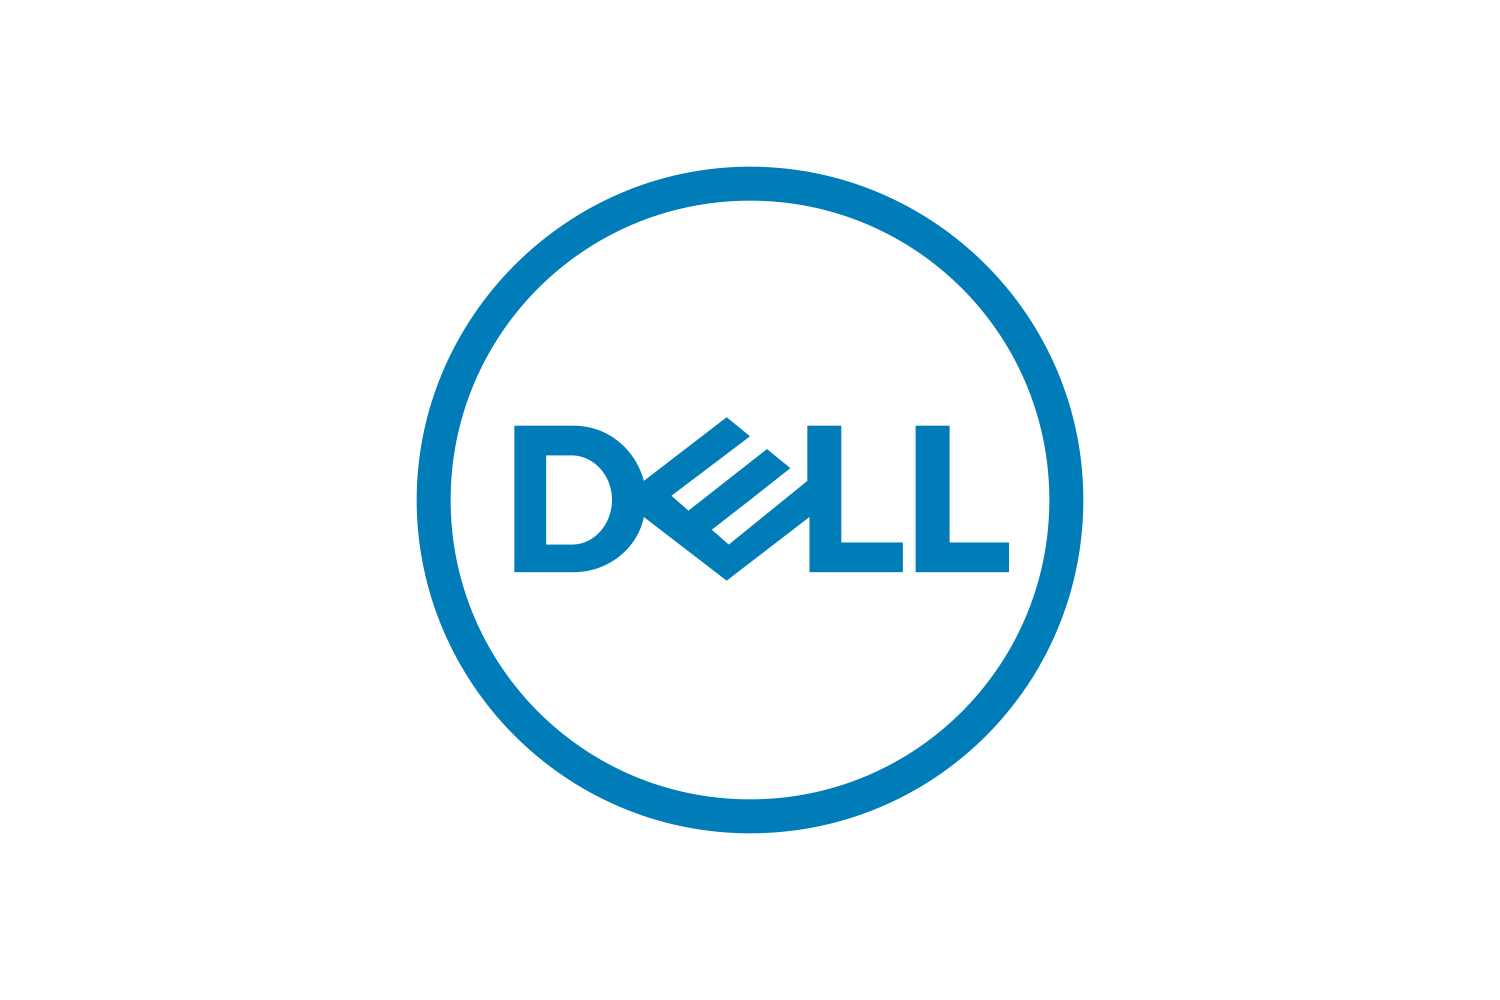 DELL Dell.png